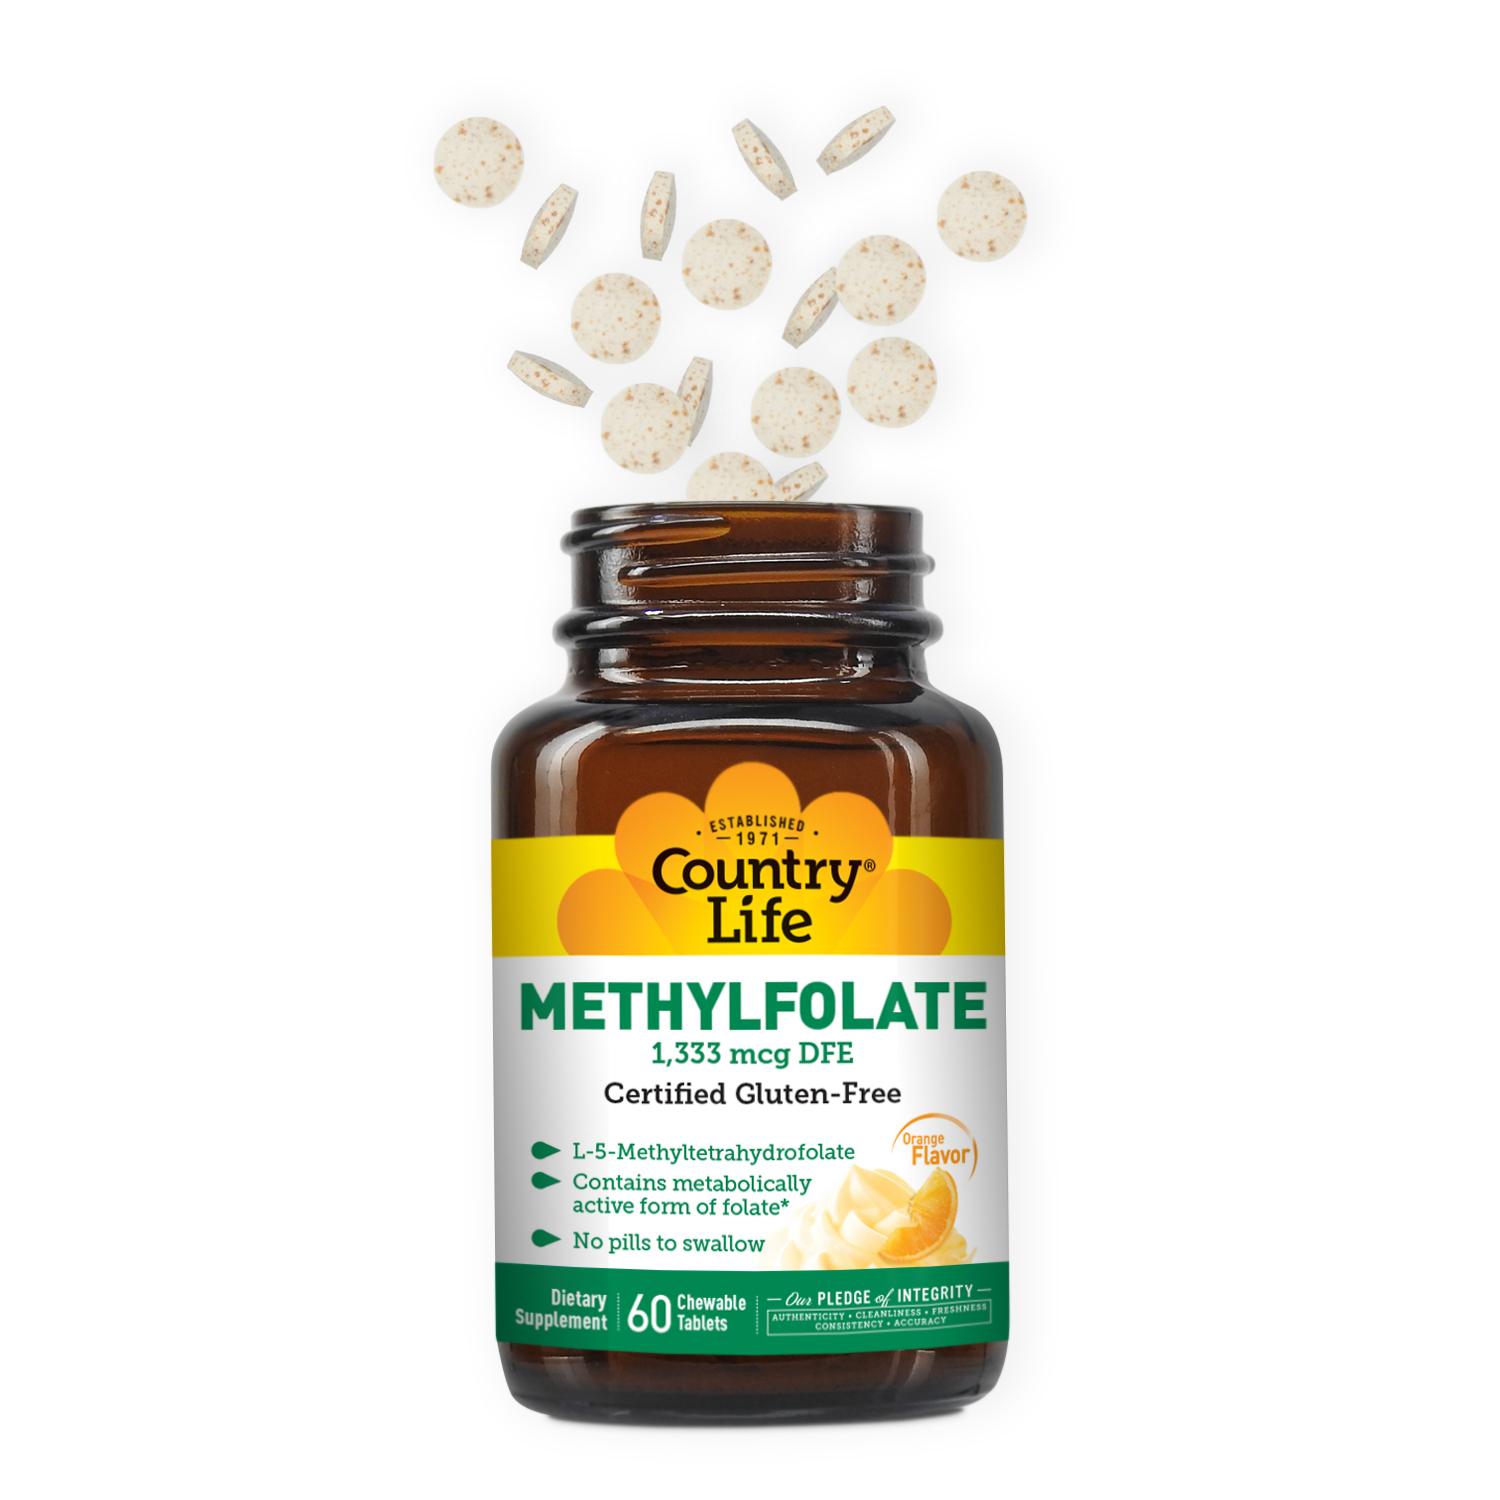 Methylfolate Chewable Tablets